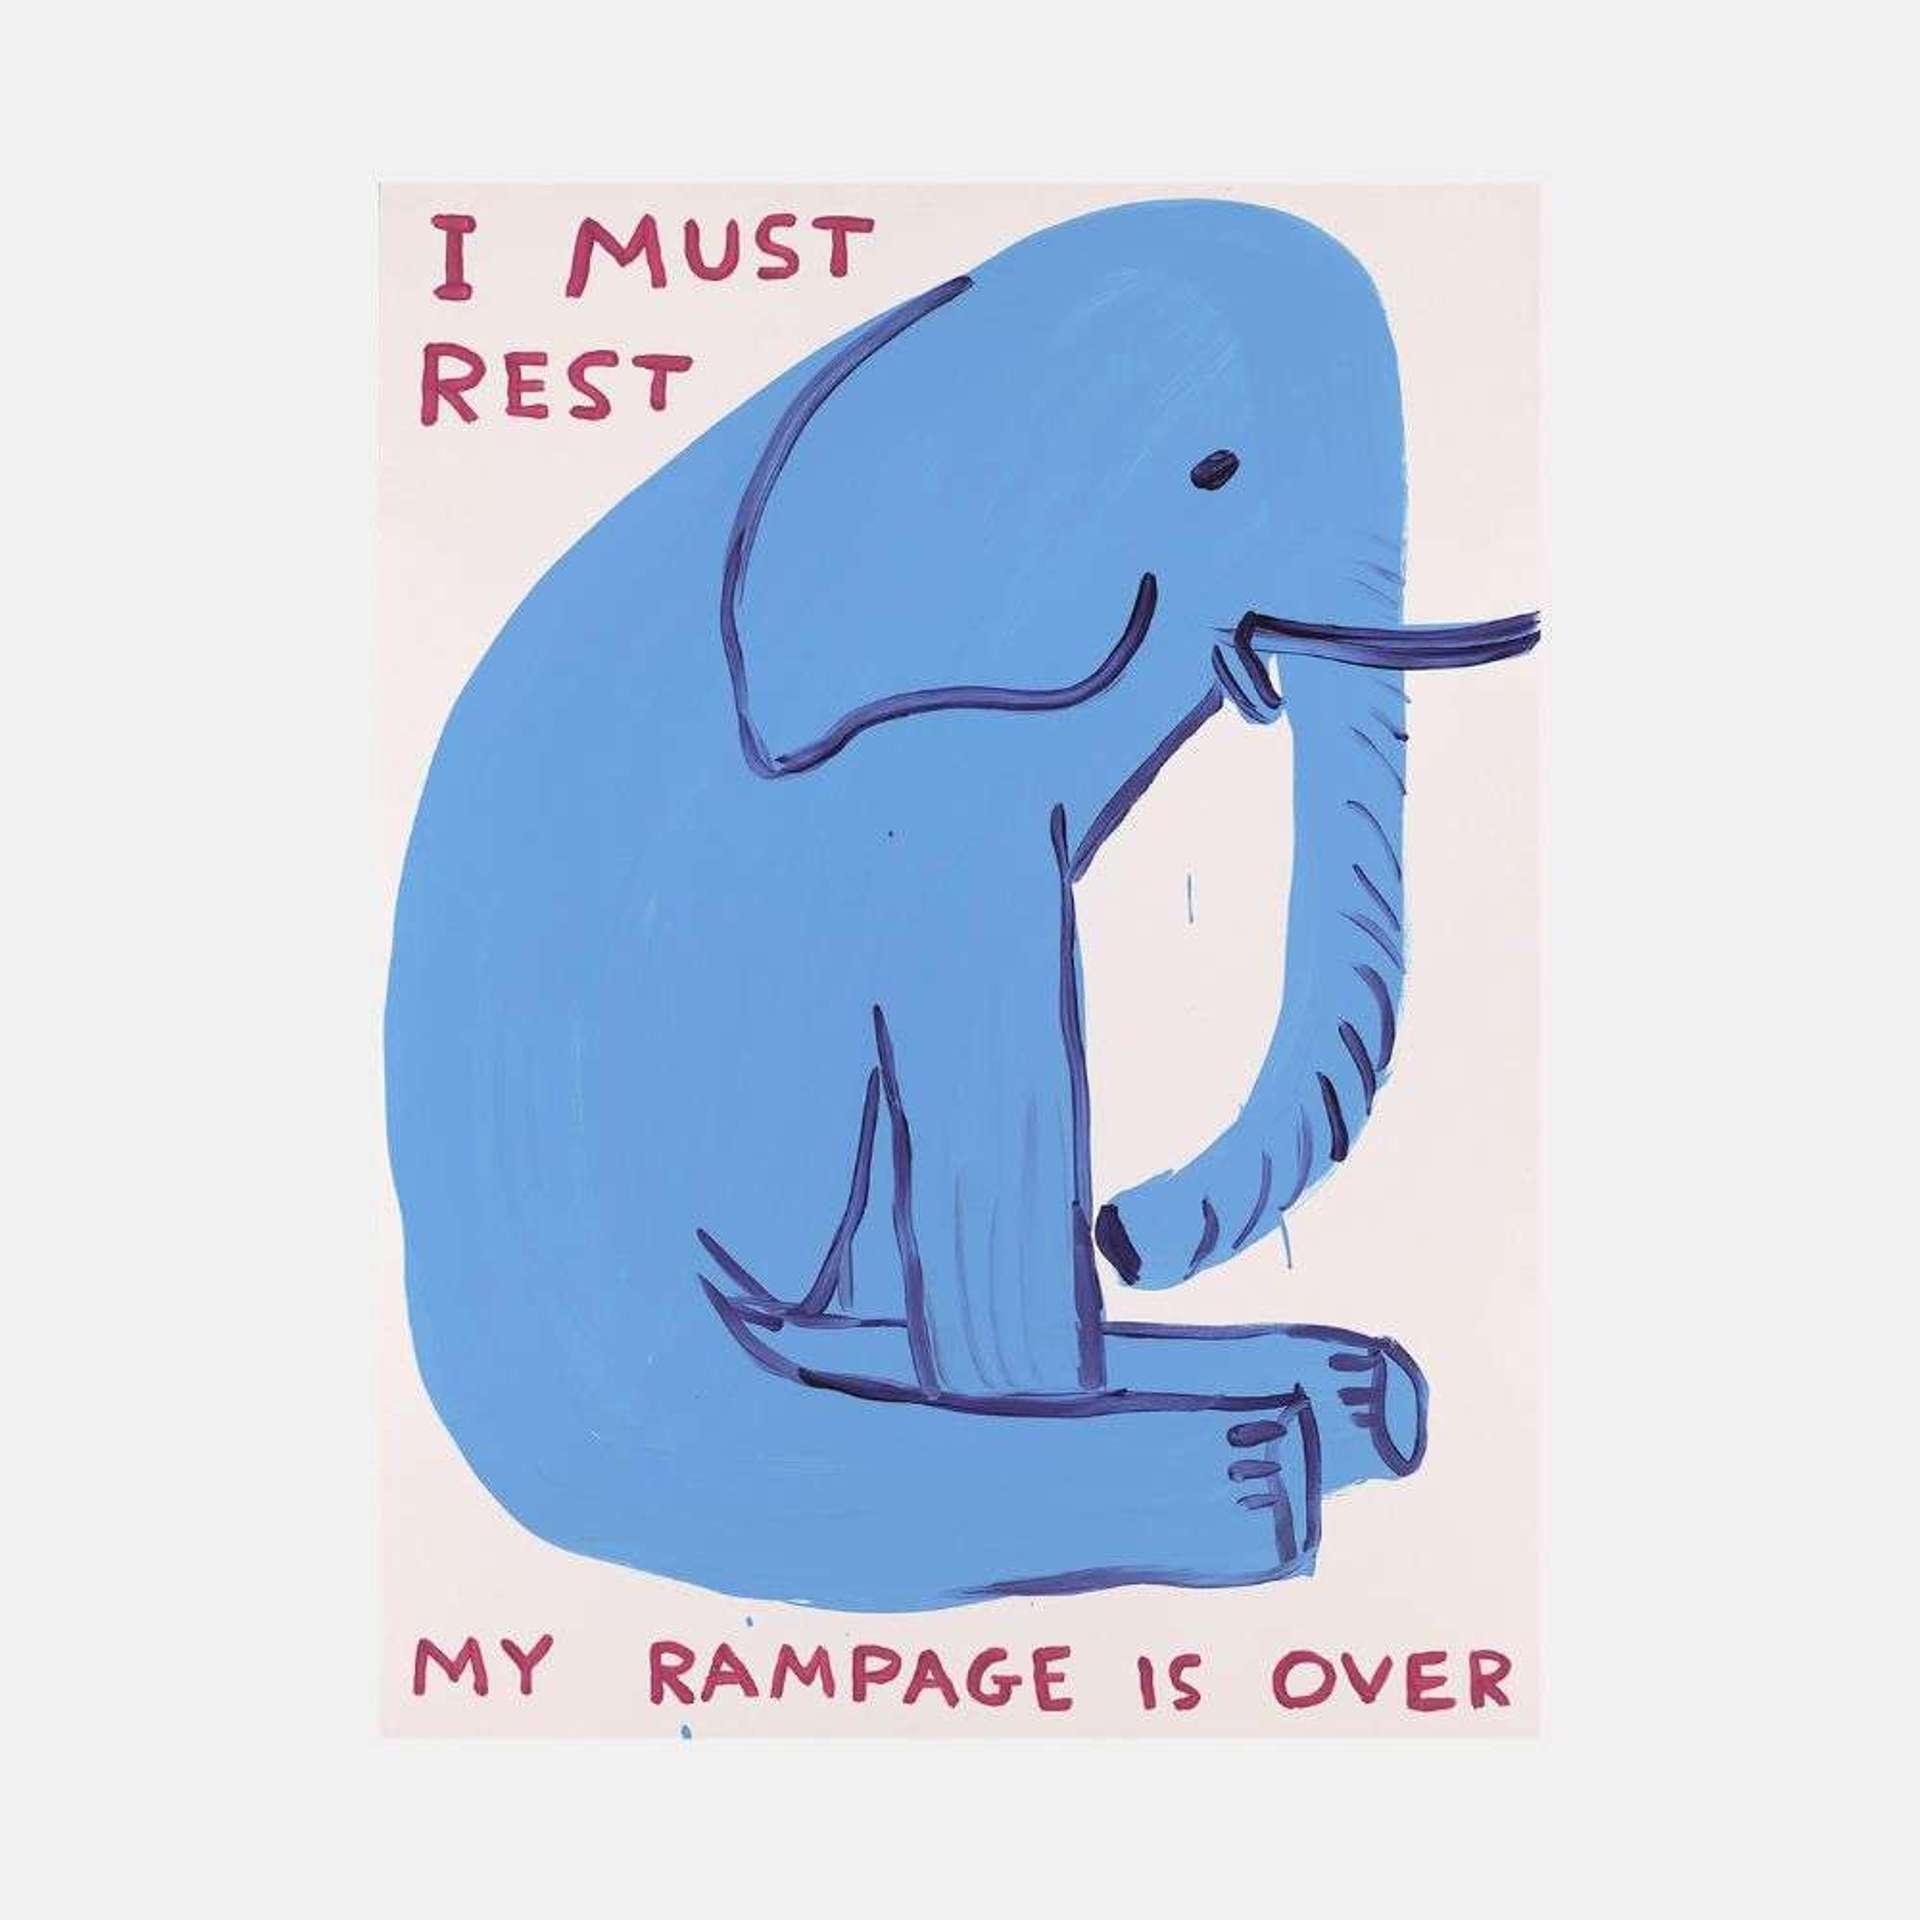 David Shrigley’s My Rampage Is Over. Large side view of a blue elephant sitting down, slightly slumped forward. Above the elephant is a purple coloured text that reads “I must rest” and below the elephant is a purple coloured text that reads “my rampage is over”. 